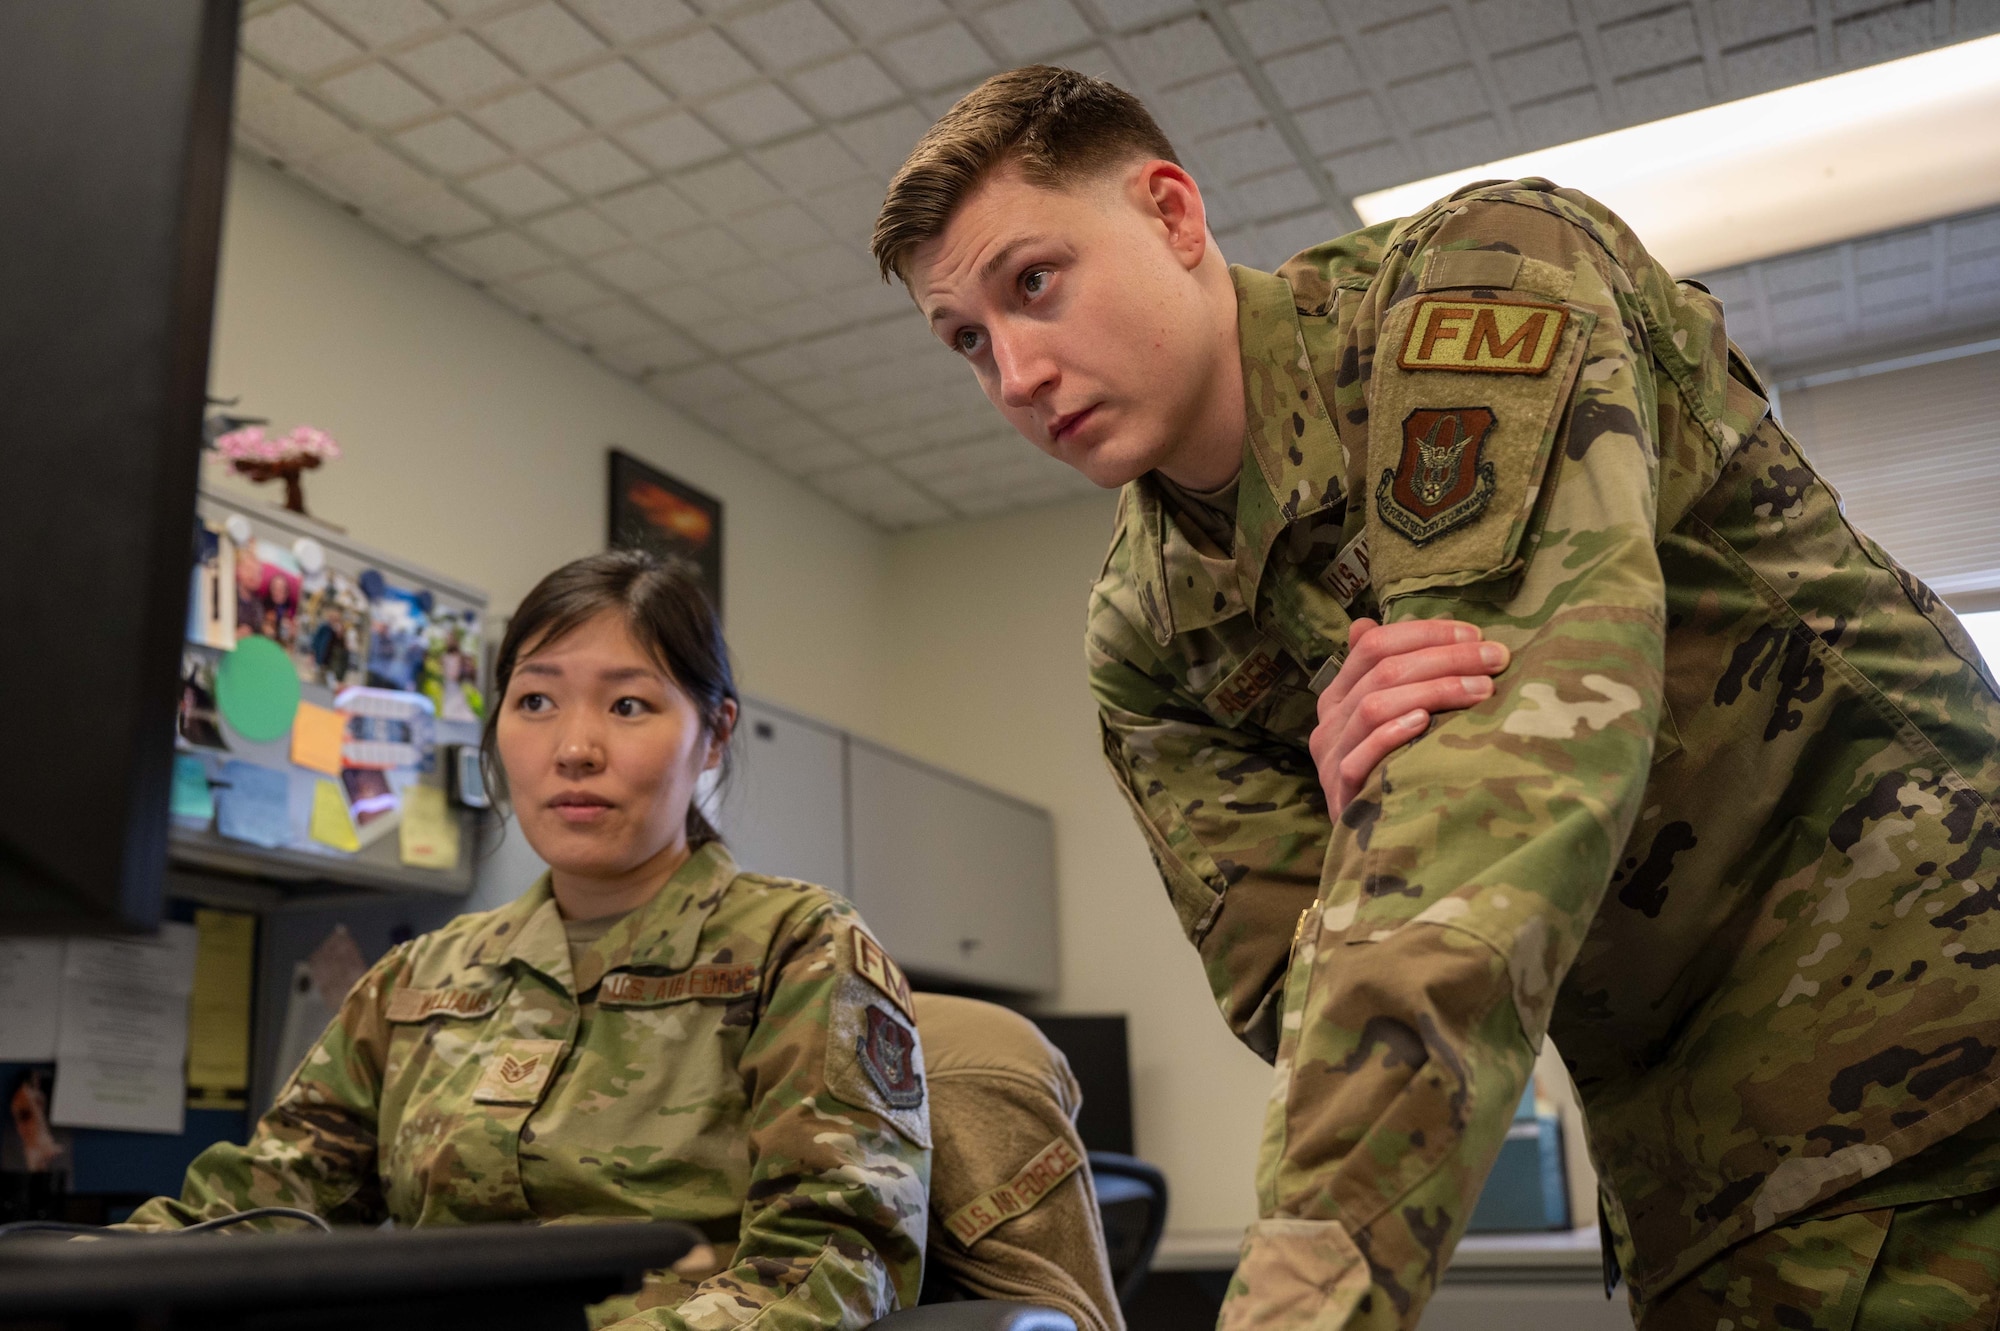 A seated female Airman, left, receives instruction from a standing male Airman, right, as he points at a computer monitor